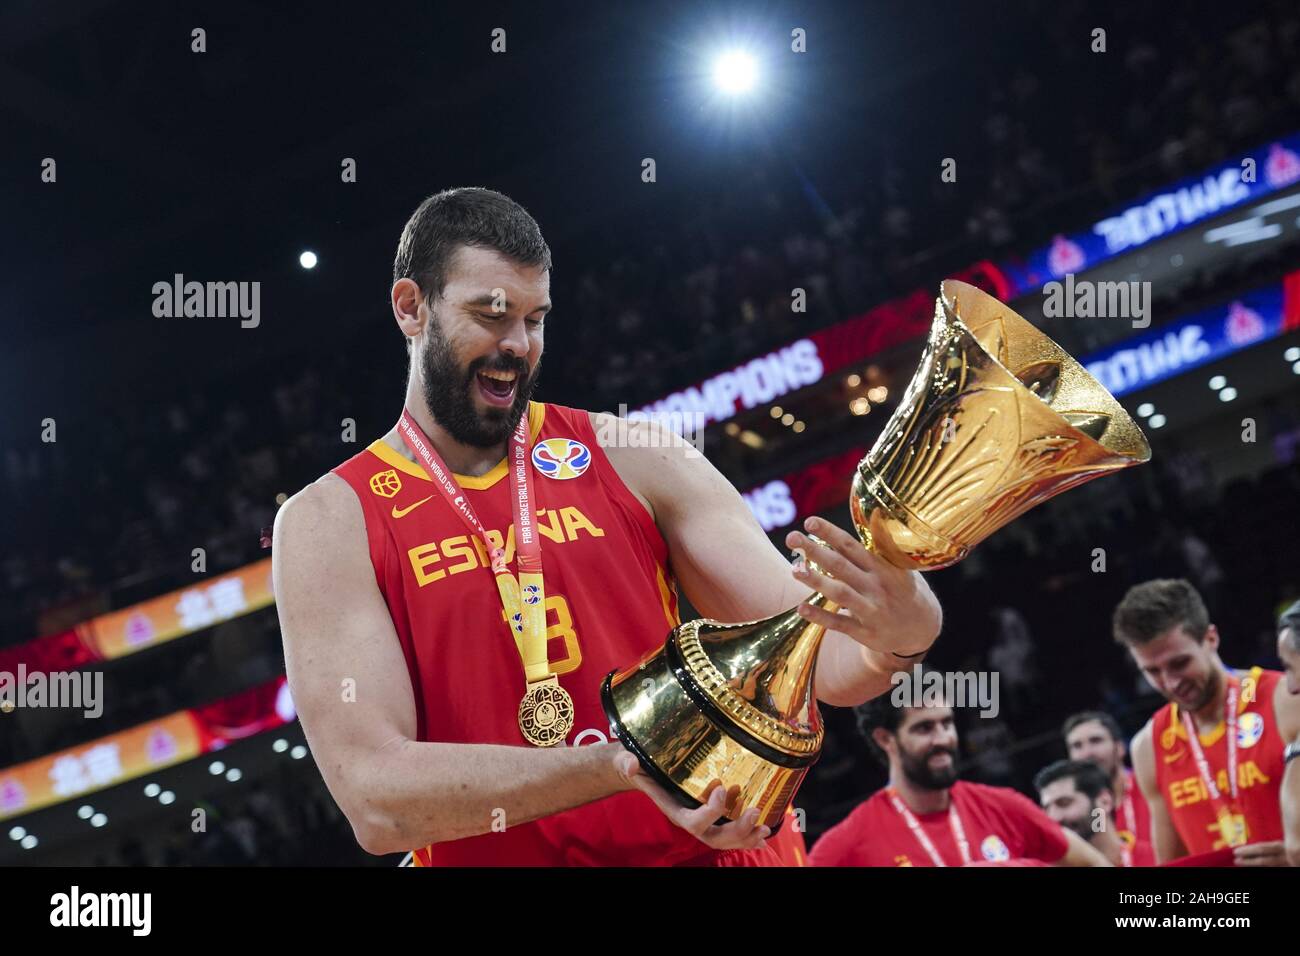 File photo taken on Sept. 15, 2019 shows Marc Gasol of Spain holding the trophy during the awarding ceremony after the final match between Spain and Argentina at the 2019 FIBA World Cup in Beijing, capital of China. Gasol played a pivotal role in Spain's triumph at the FIBA World Cup in September, a few months after he helped the Toronto Raptors win their first NBA championship. The 2.15-meter center was selected in the World Cup's All-Star Team, and along with Lamar Odom, is one of only two players to win an NBA title and the World Cup in the sam Stock Photo